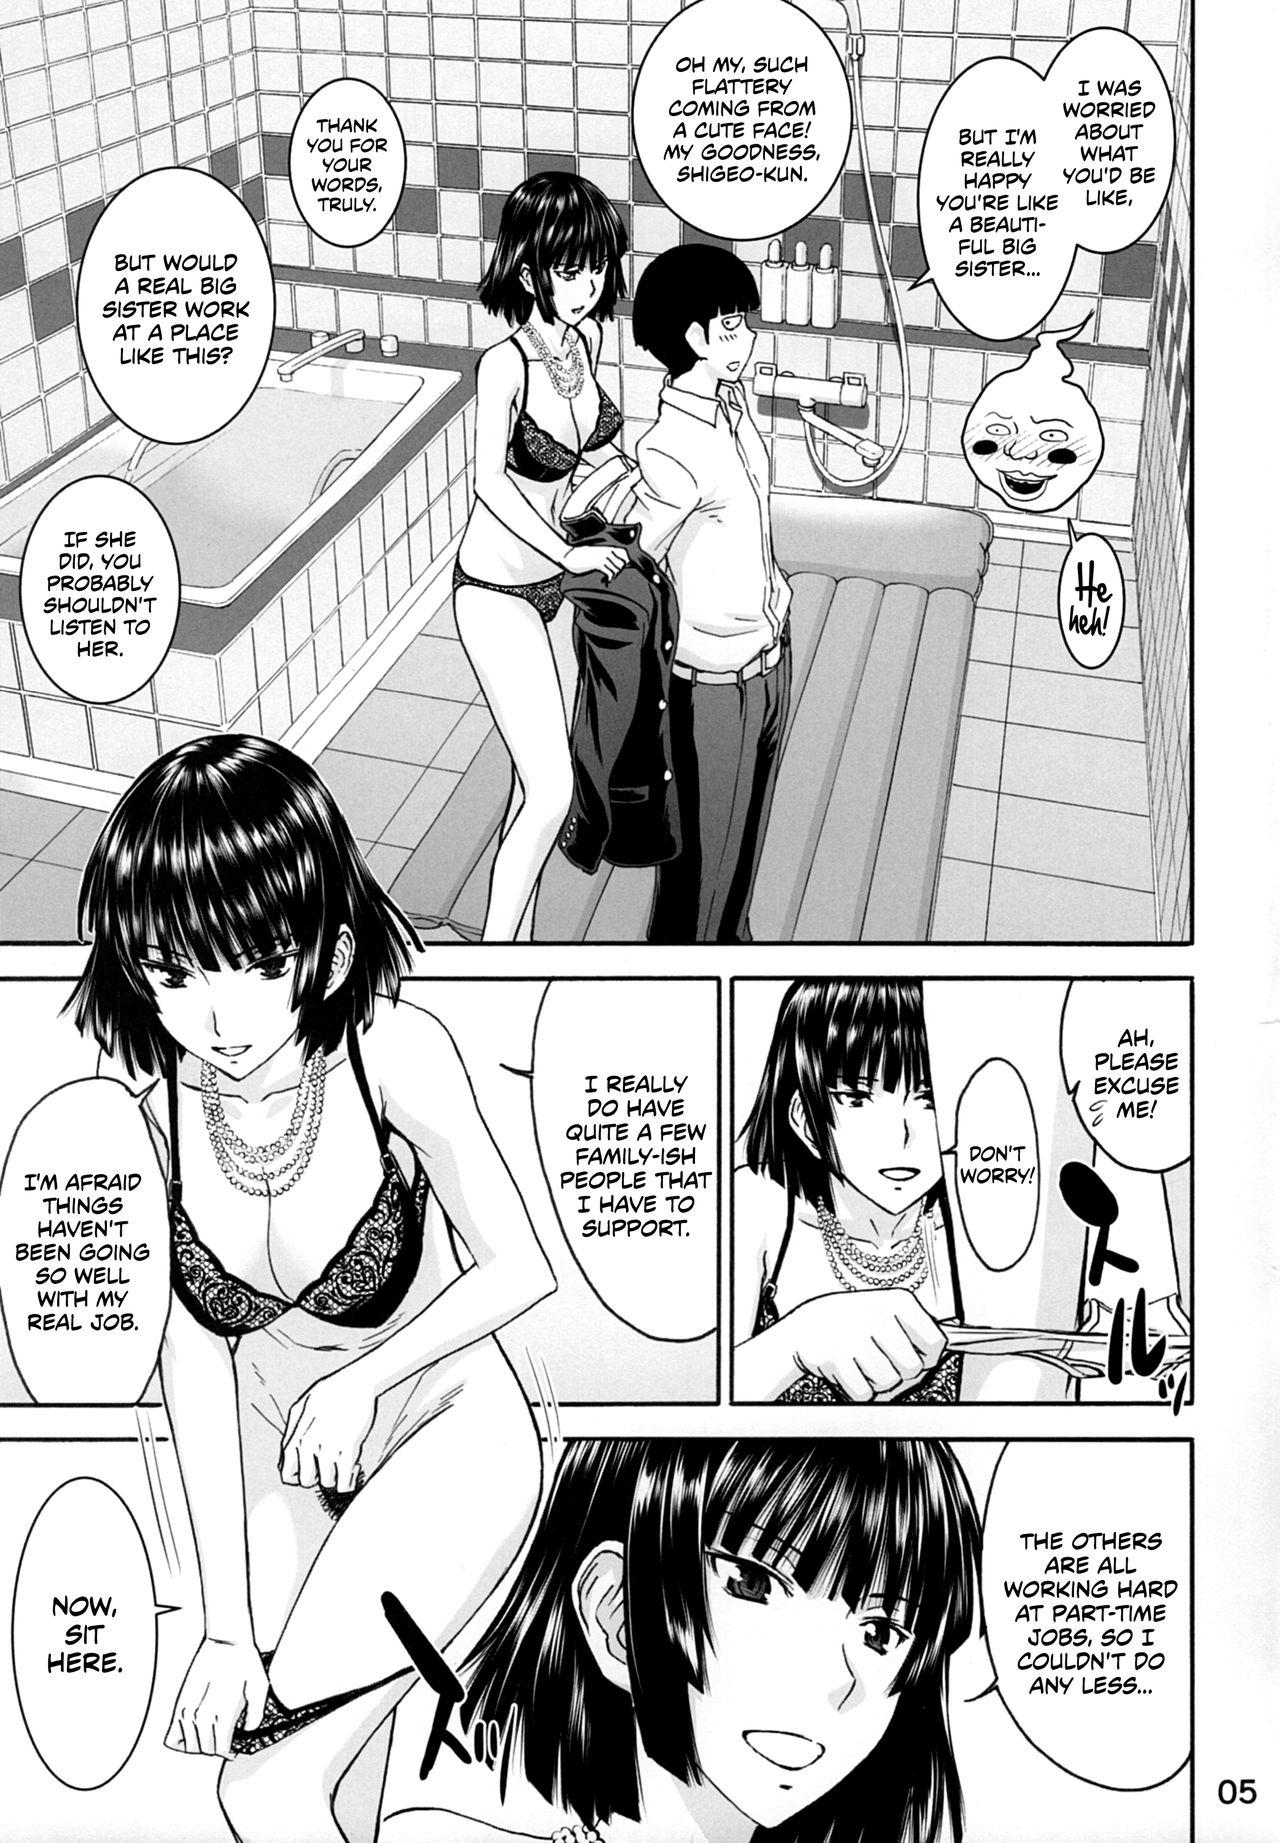 Naked Sex (C90) [High Thrust (Inomaru)] Current B-Class Rank 1 Hero Losing Your Virginity Where Hellish Fubuki-sama Offers Her Services!! (One Punch Man, Mob Psycho 100) [English] [EHCOVE] - One punch man Mob psycho 100 Love Making - Page 4